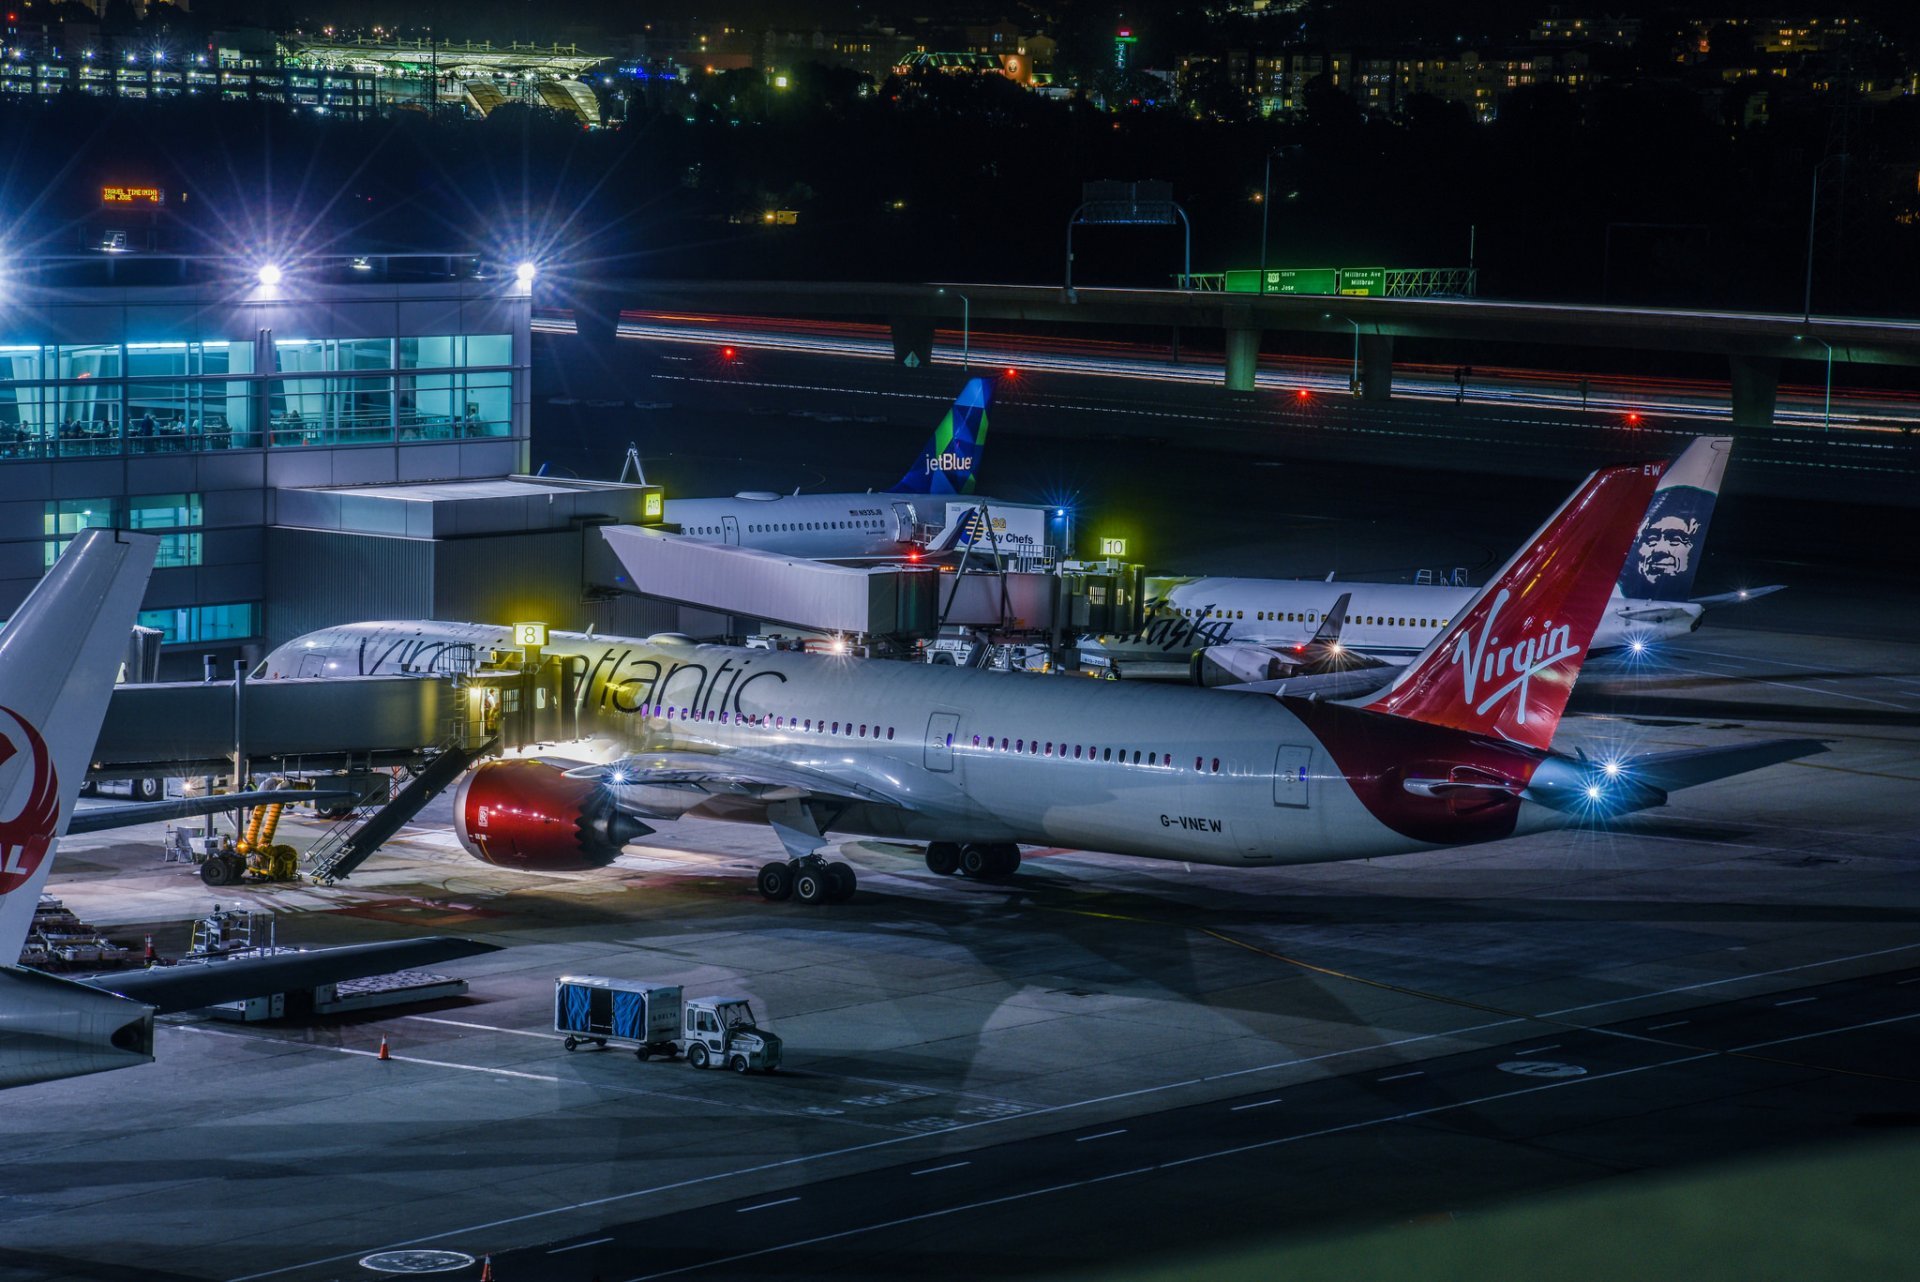 Airbus Plane Airport Night Lights - Airport At Night Wallpaper Pc , HD Wallpaper & Backgrounds